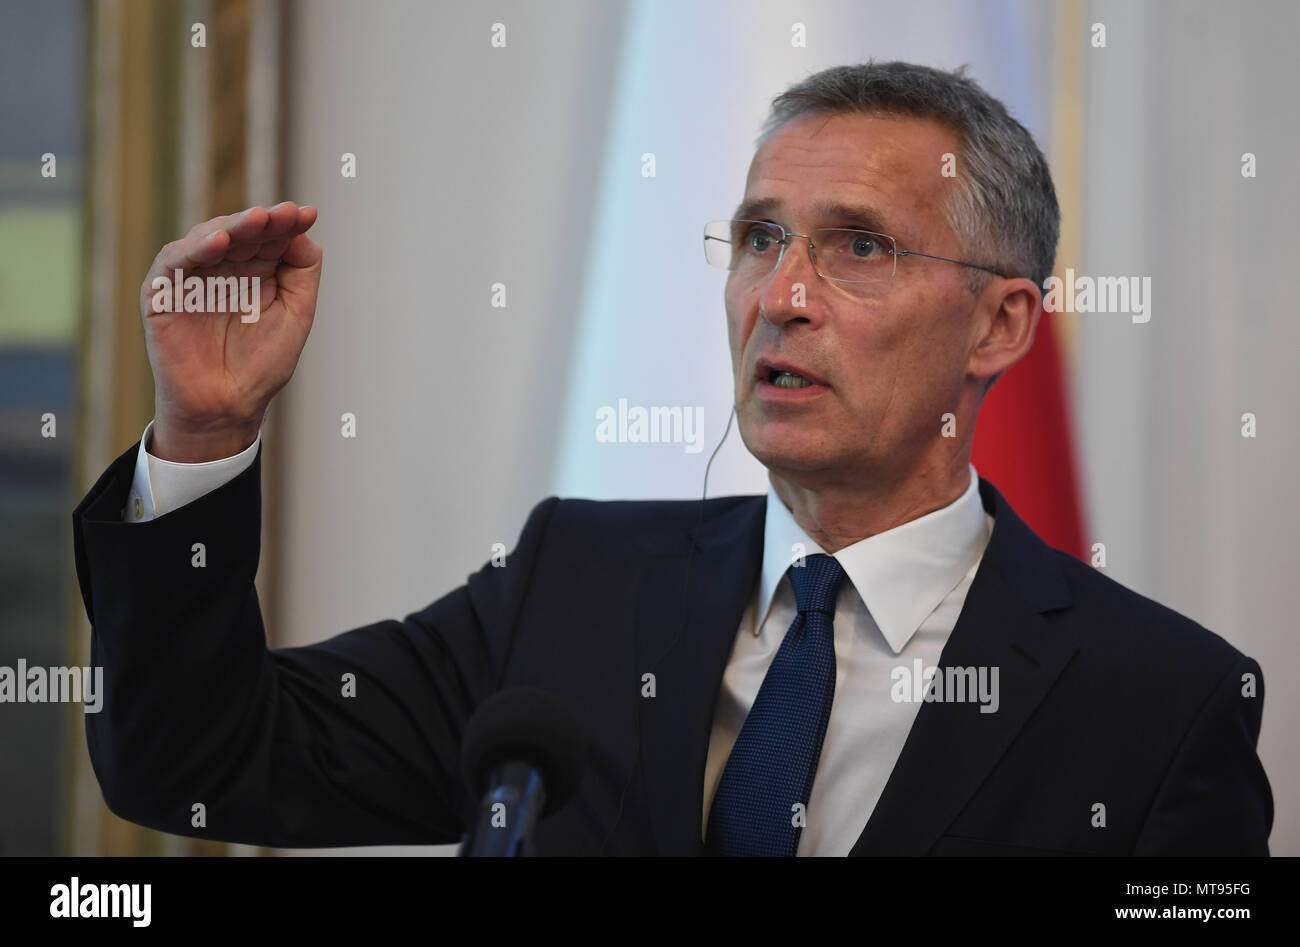 Warsaw, Poland. 28th May, 2018. NATO Secretary General Jens Stoltenberg speaks at a joint press conference with Polish President Andrzej Duda (not in picture) at Belweder Palace in Warsaw, Poland, on May 28, 2018. Credit: Maciej Gillert/Xinhua/Alamy Live News Stock Photo